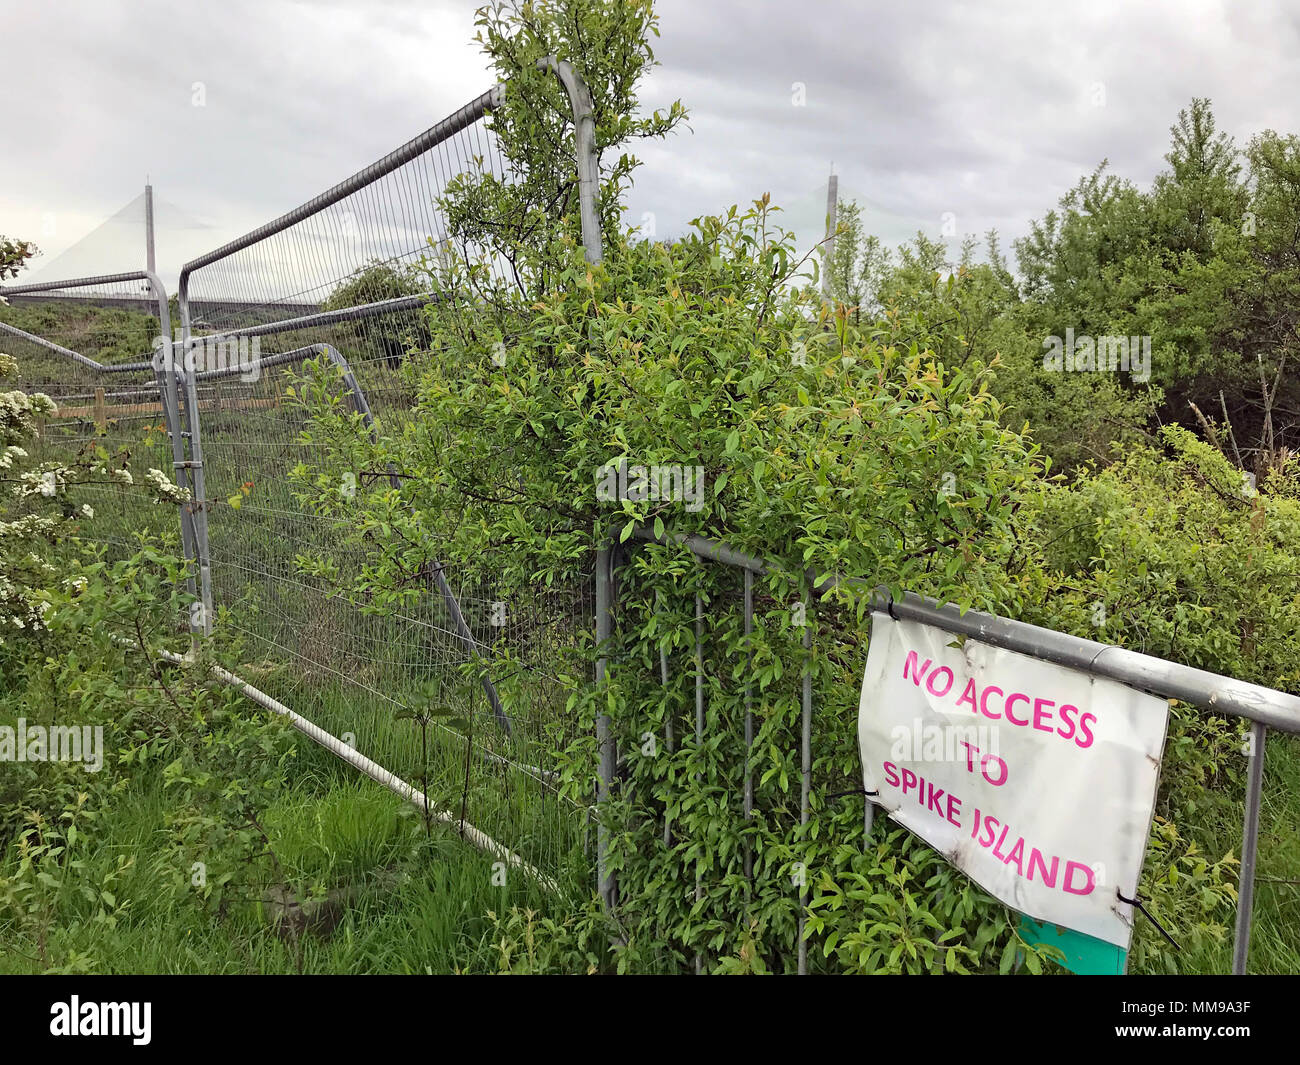 TPT Transpennine Trail, no access to Spike Island, Widnes at new crossing Stock Photo